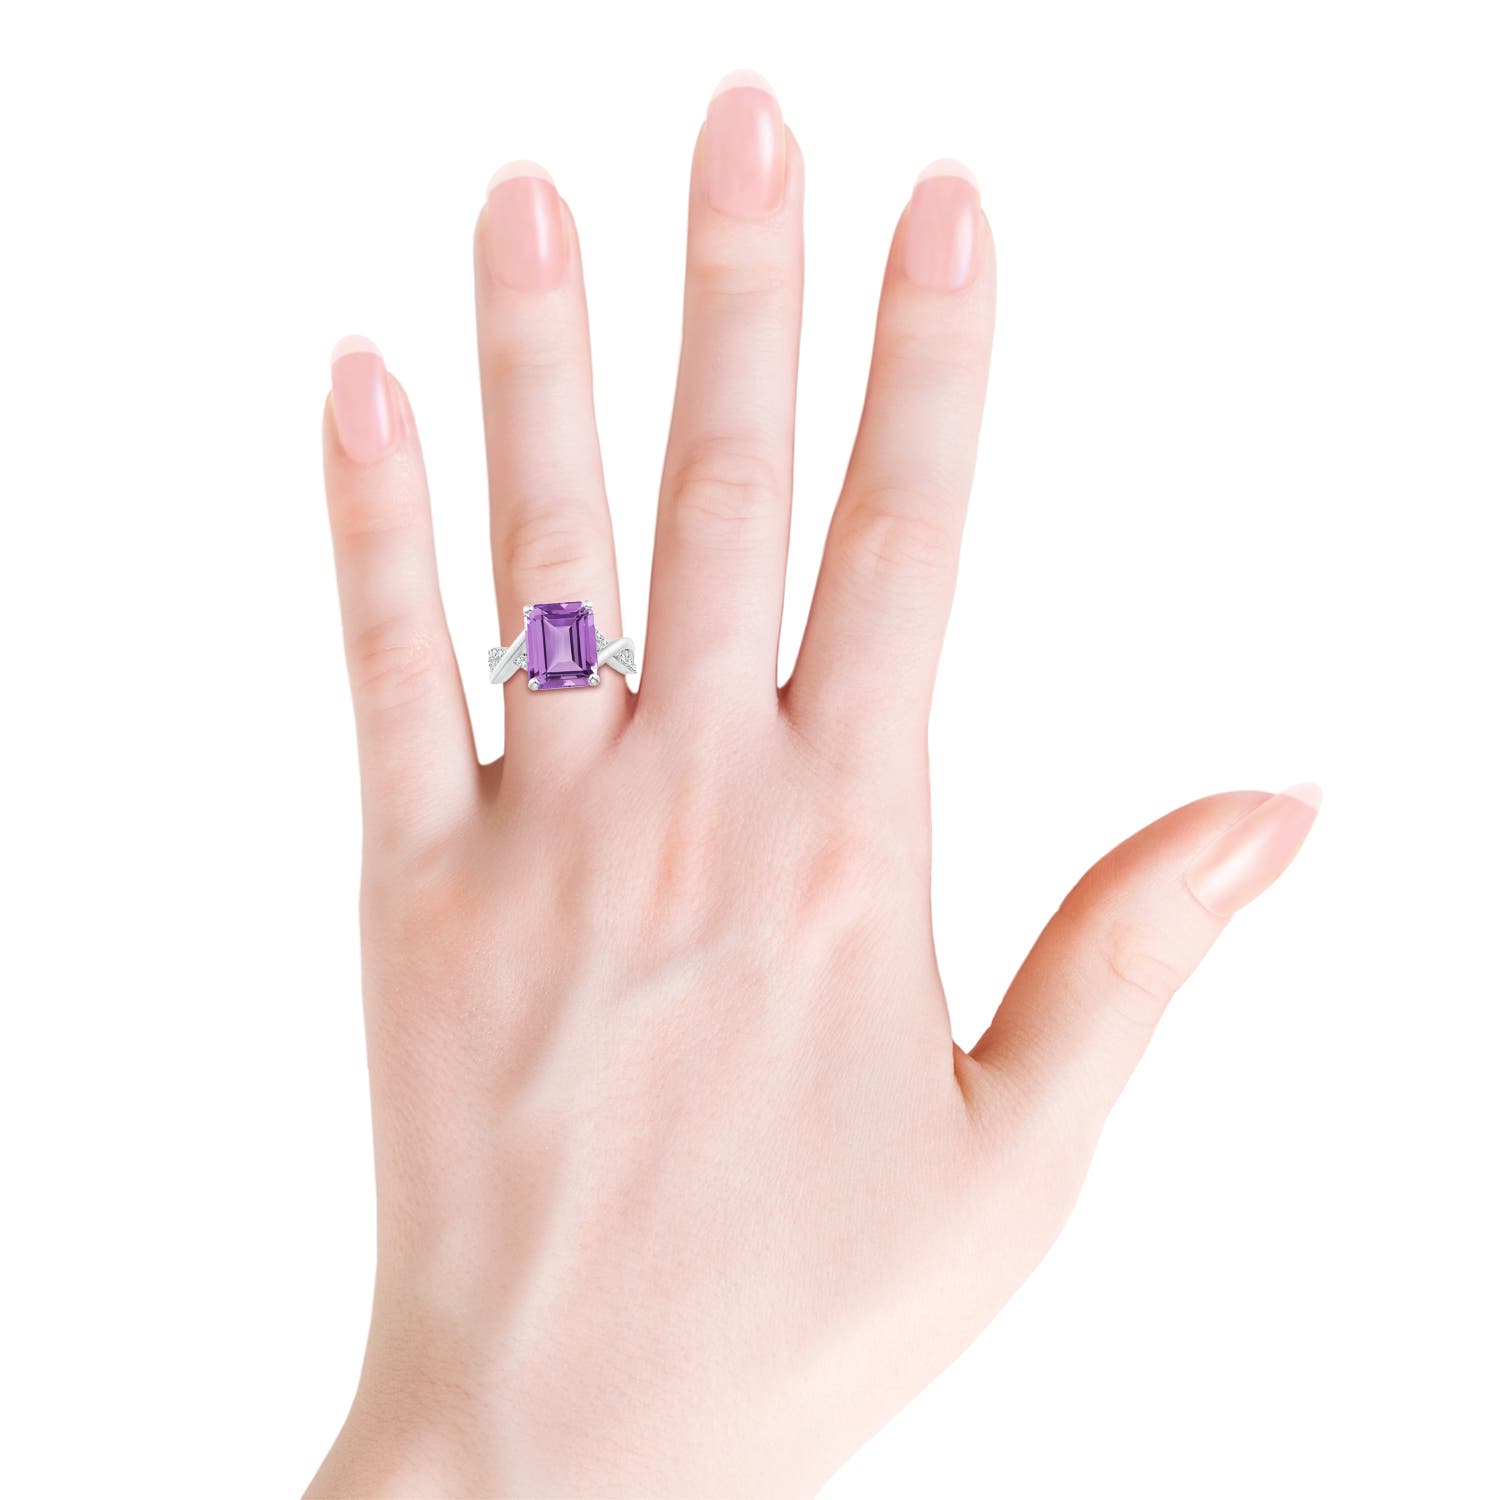 A - Amethyst / 5.47 CT / 14 KT White Gold